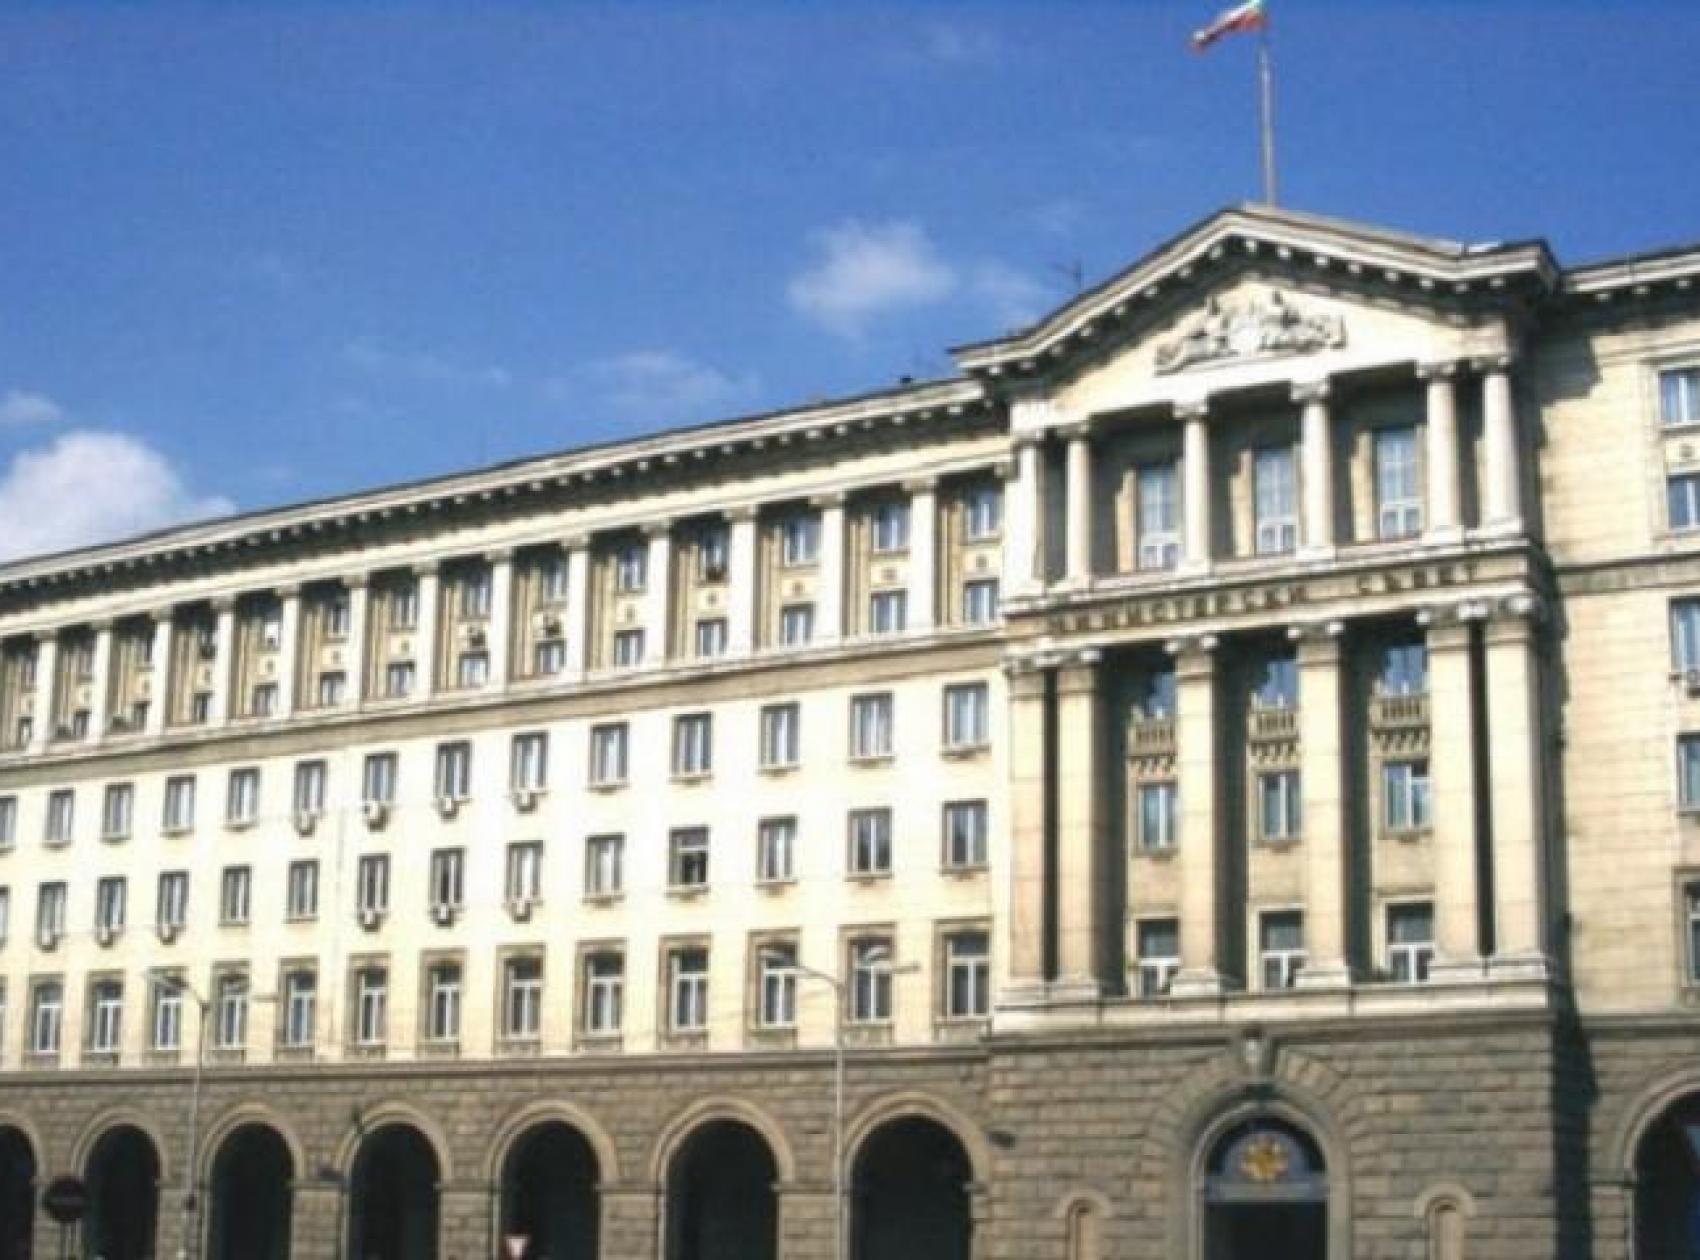 The Council of Ministers is expected to discuss new measures